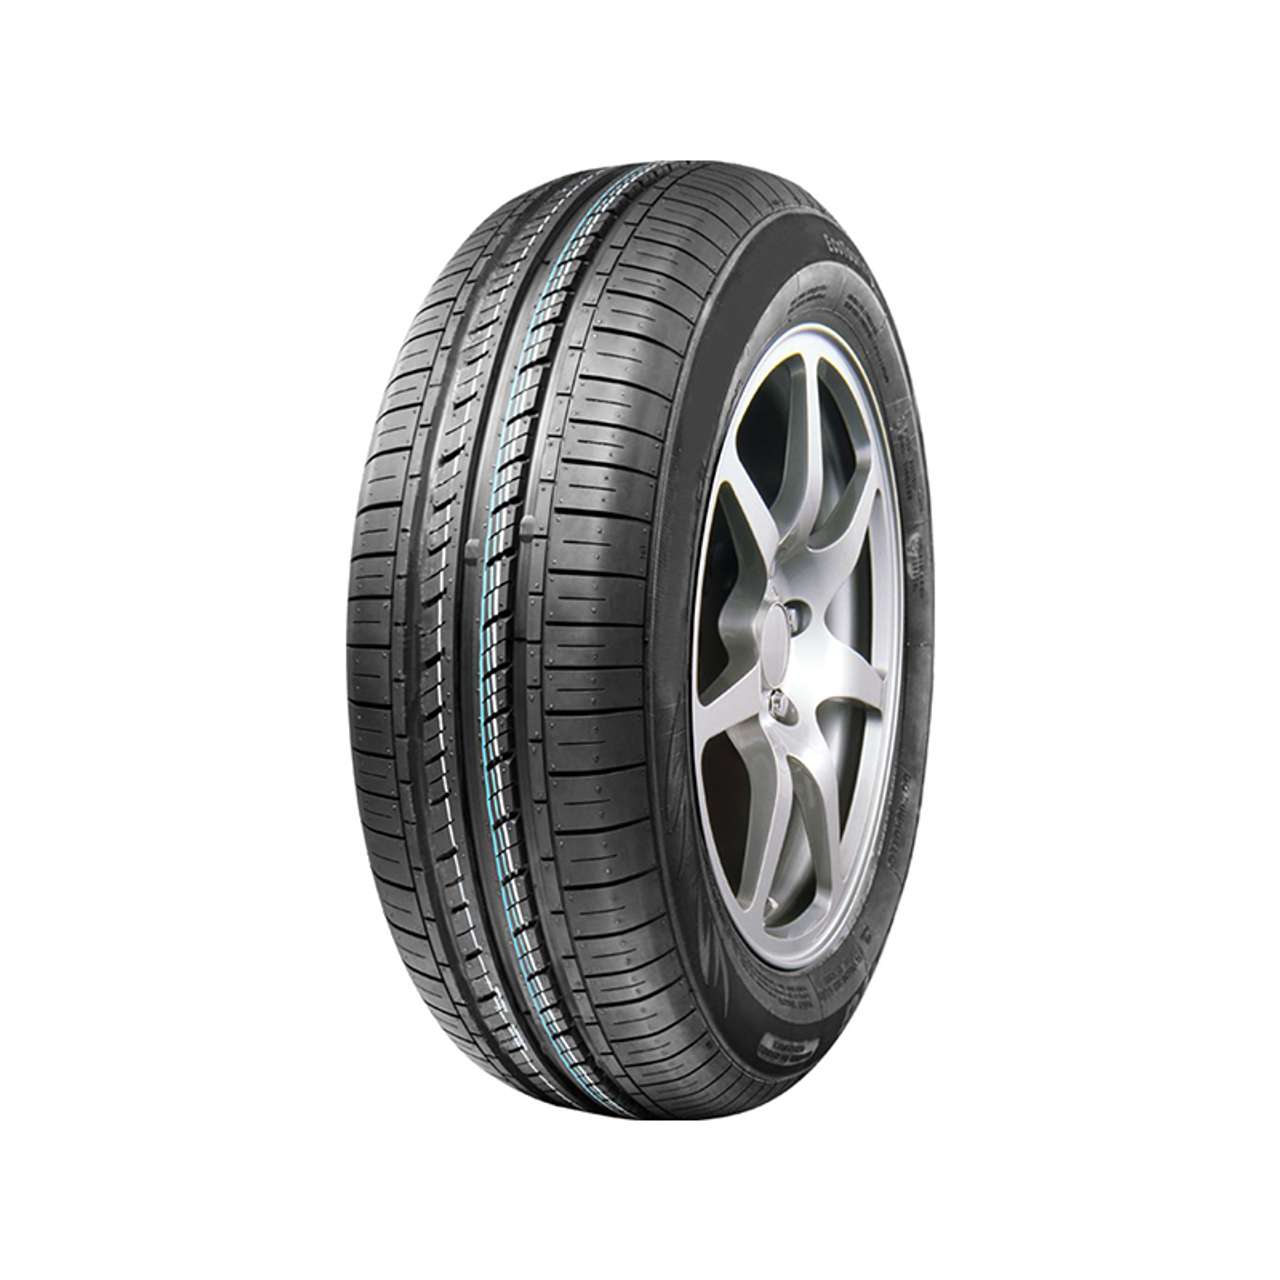 STAR PERFORMER COMET 175/70R14 88T BSW